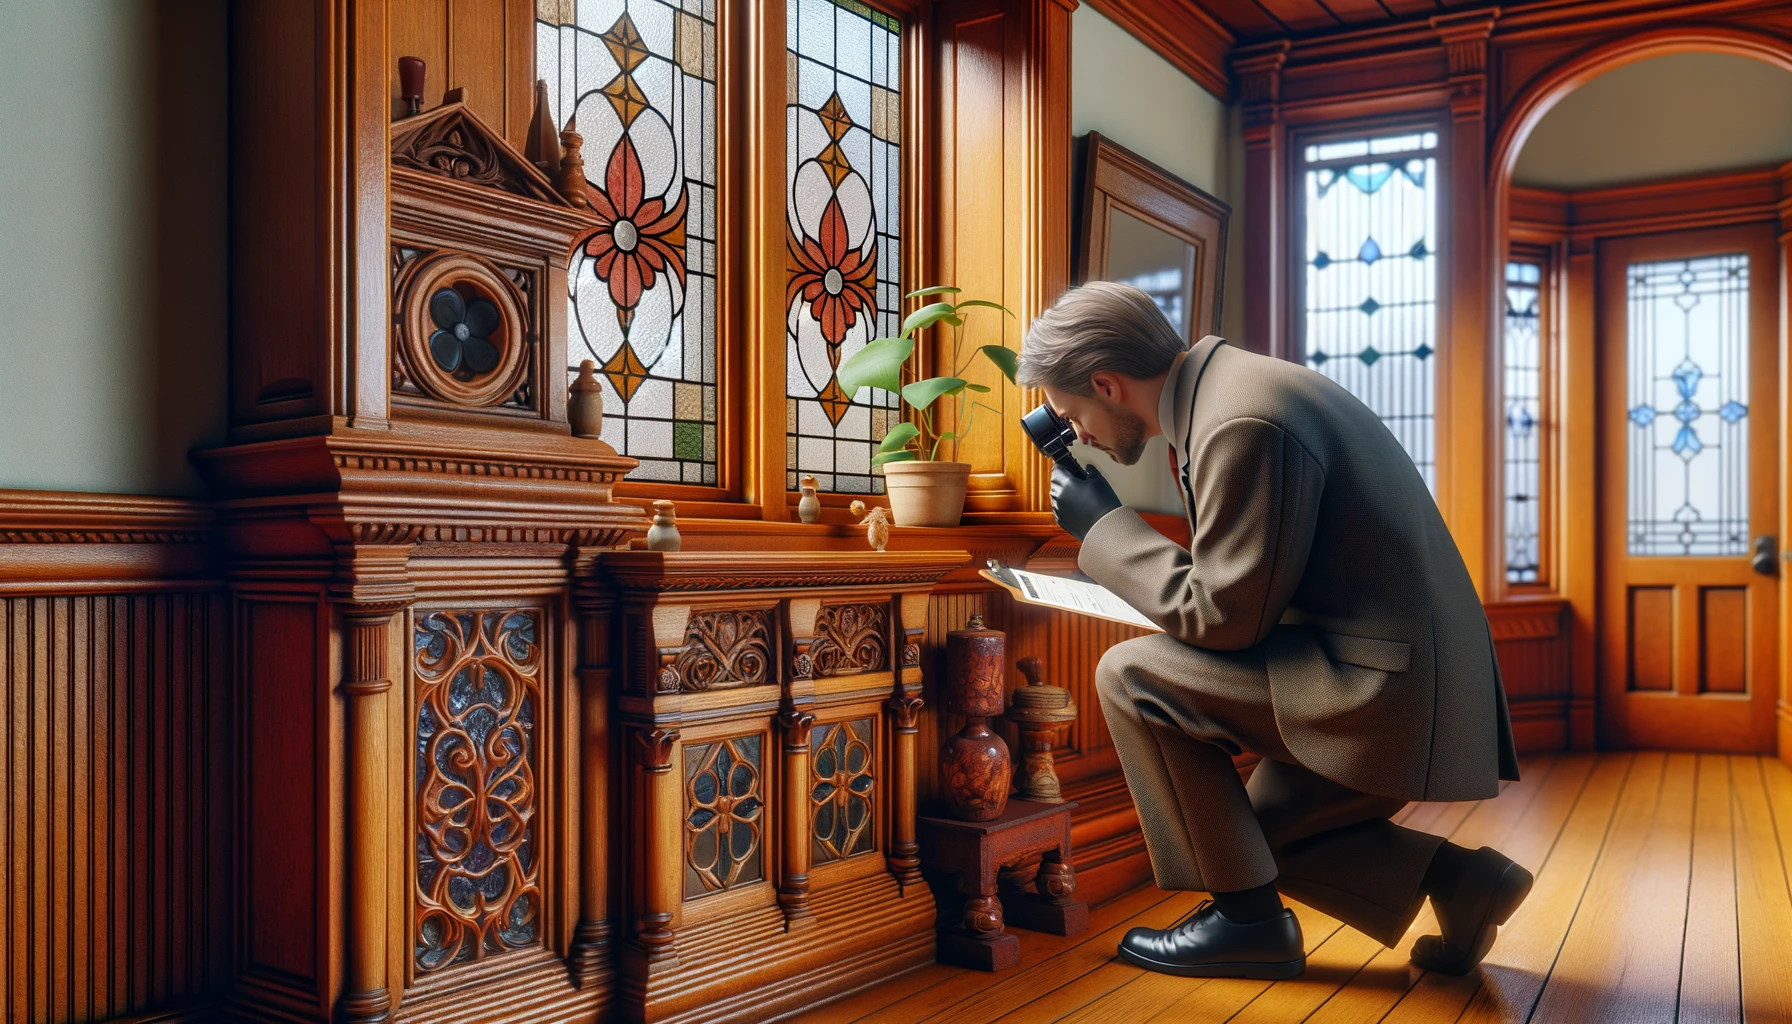 Man inspecting object with magnifying glass in vintage room.